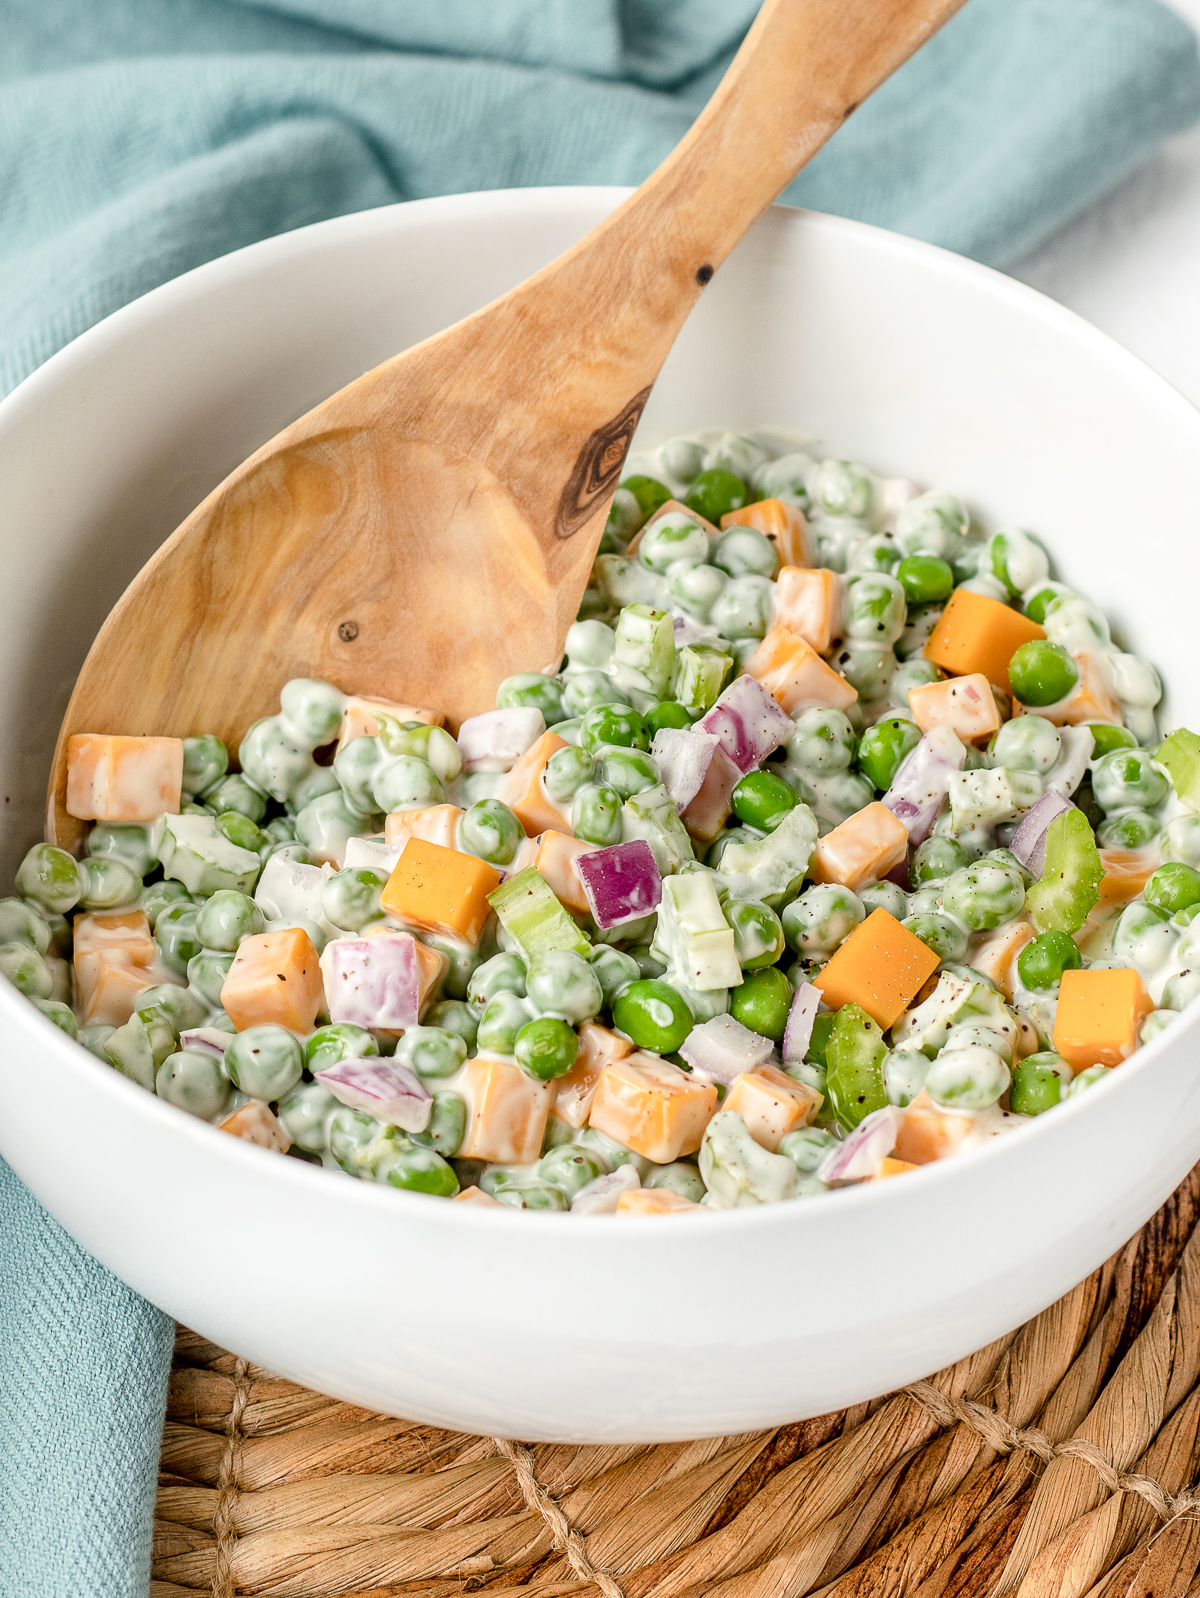 Spoon in a large bowl of colorful pea salad- green peas and celery, purple red onion, and orange cheddar cheese.